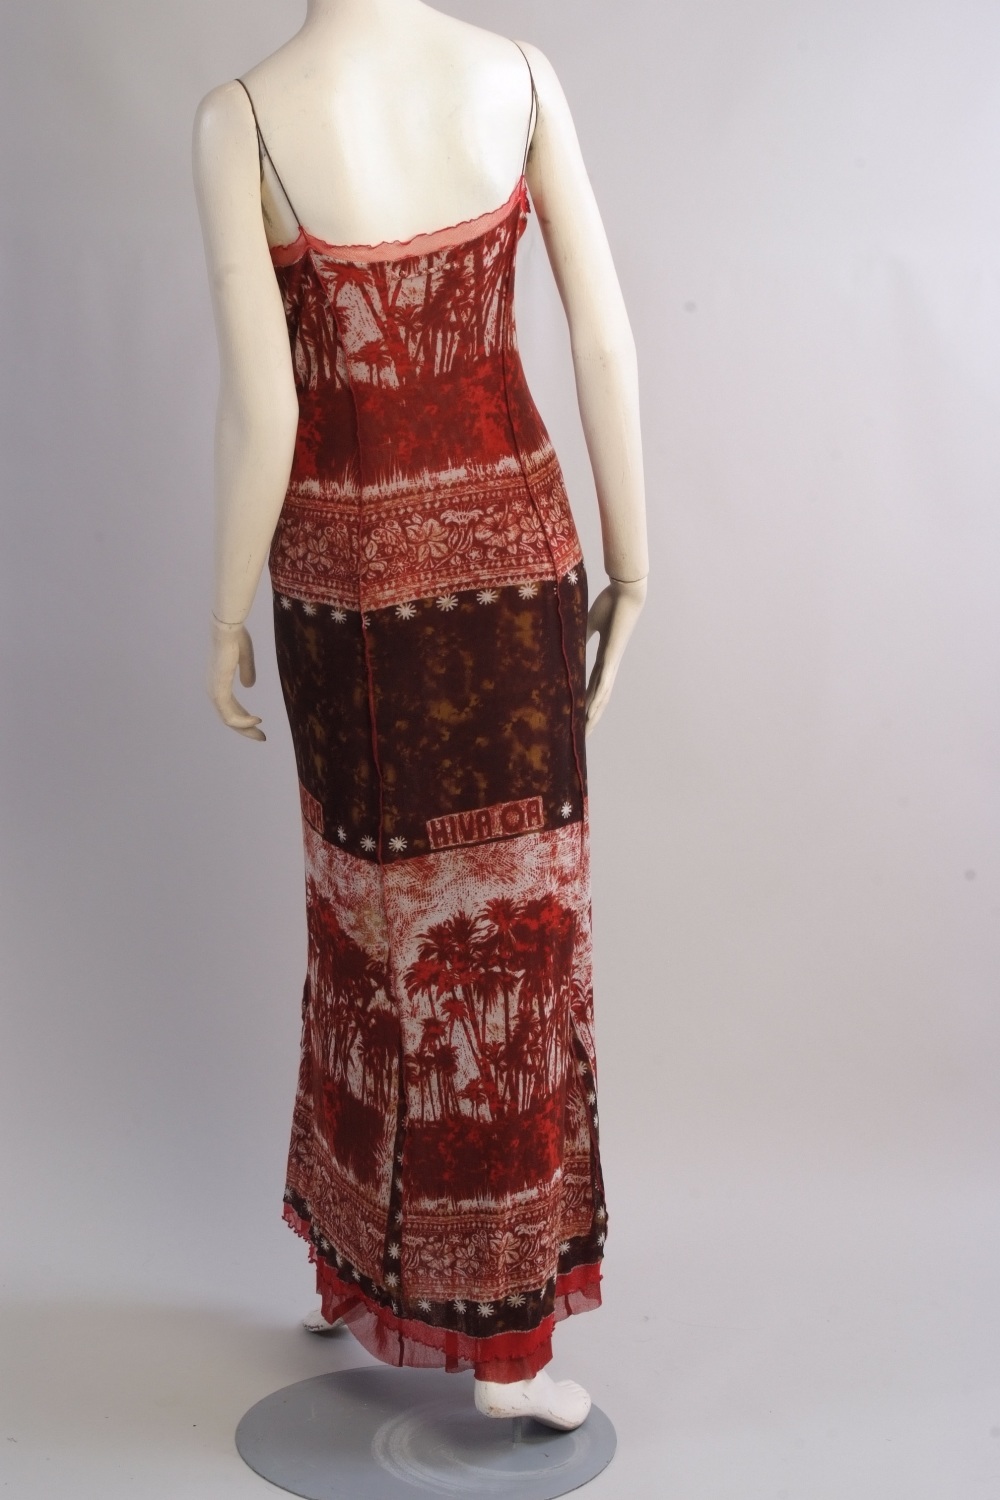 A 'Jean Paul Gaultier' Hiva Or mesh dres - Image 4 of 6